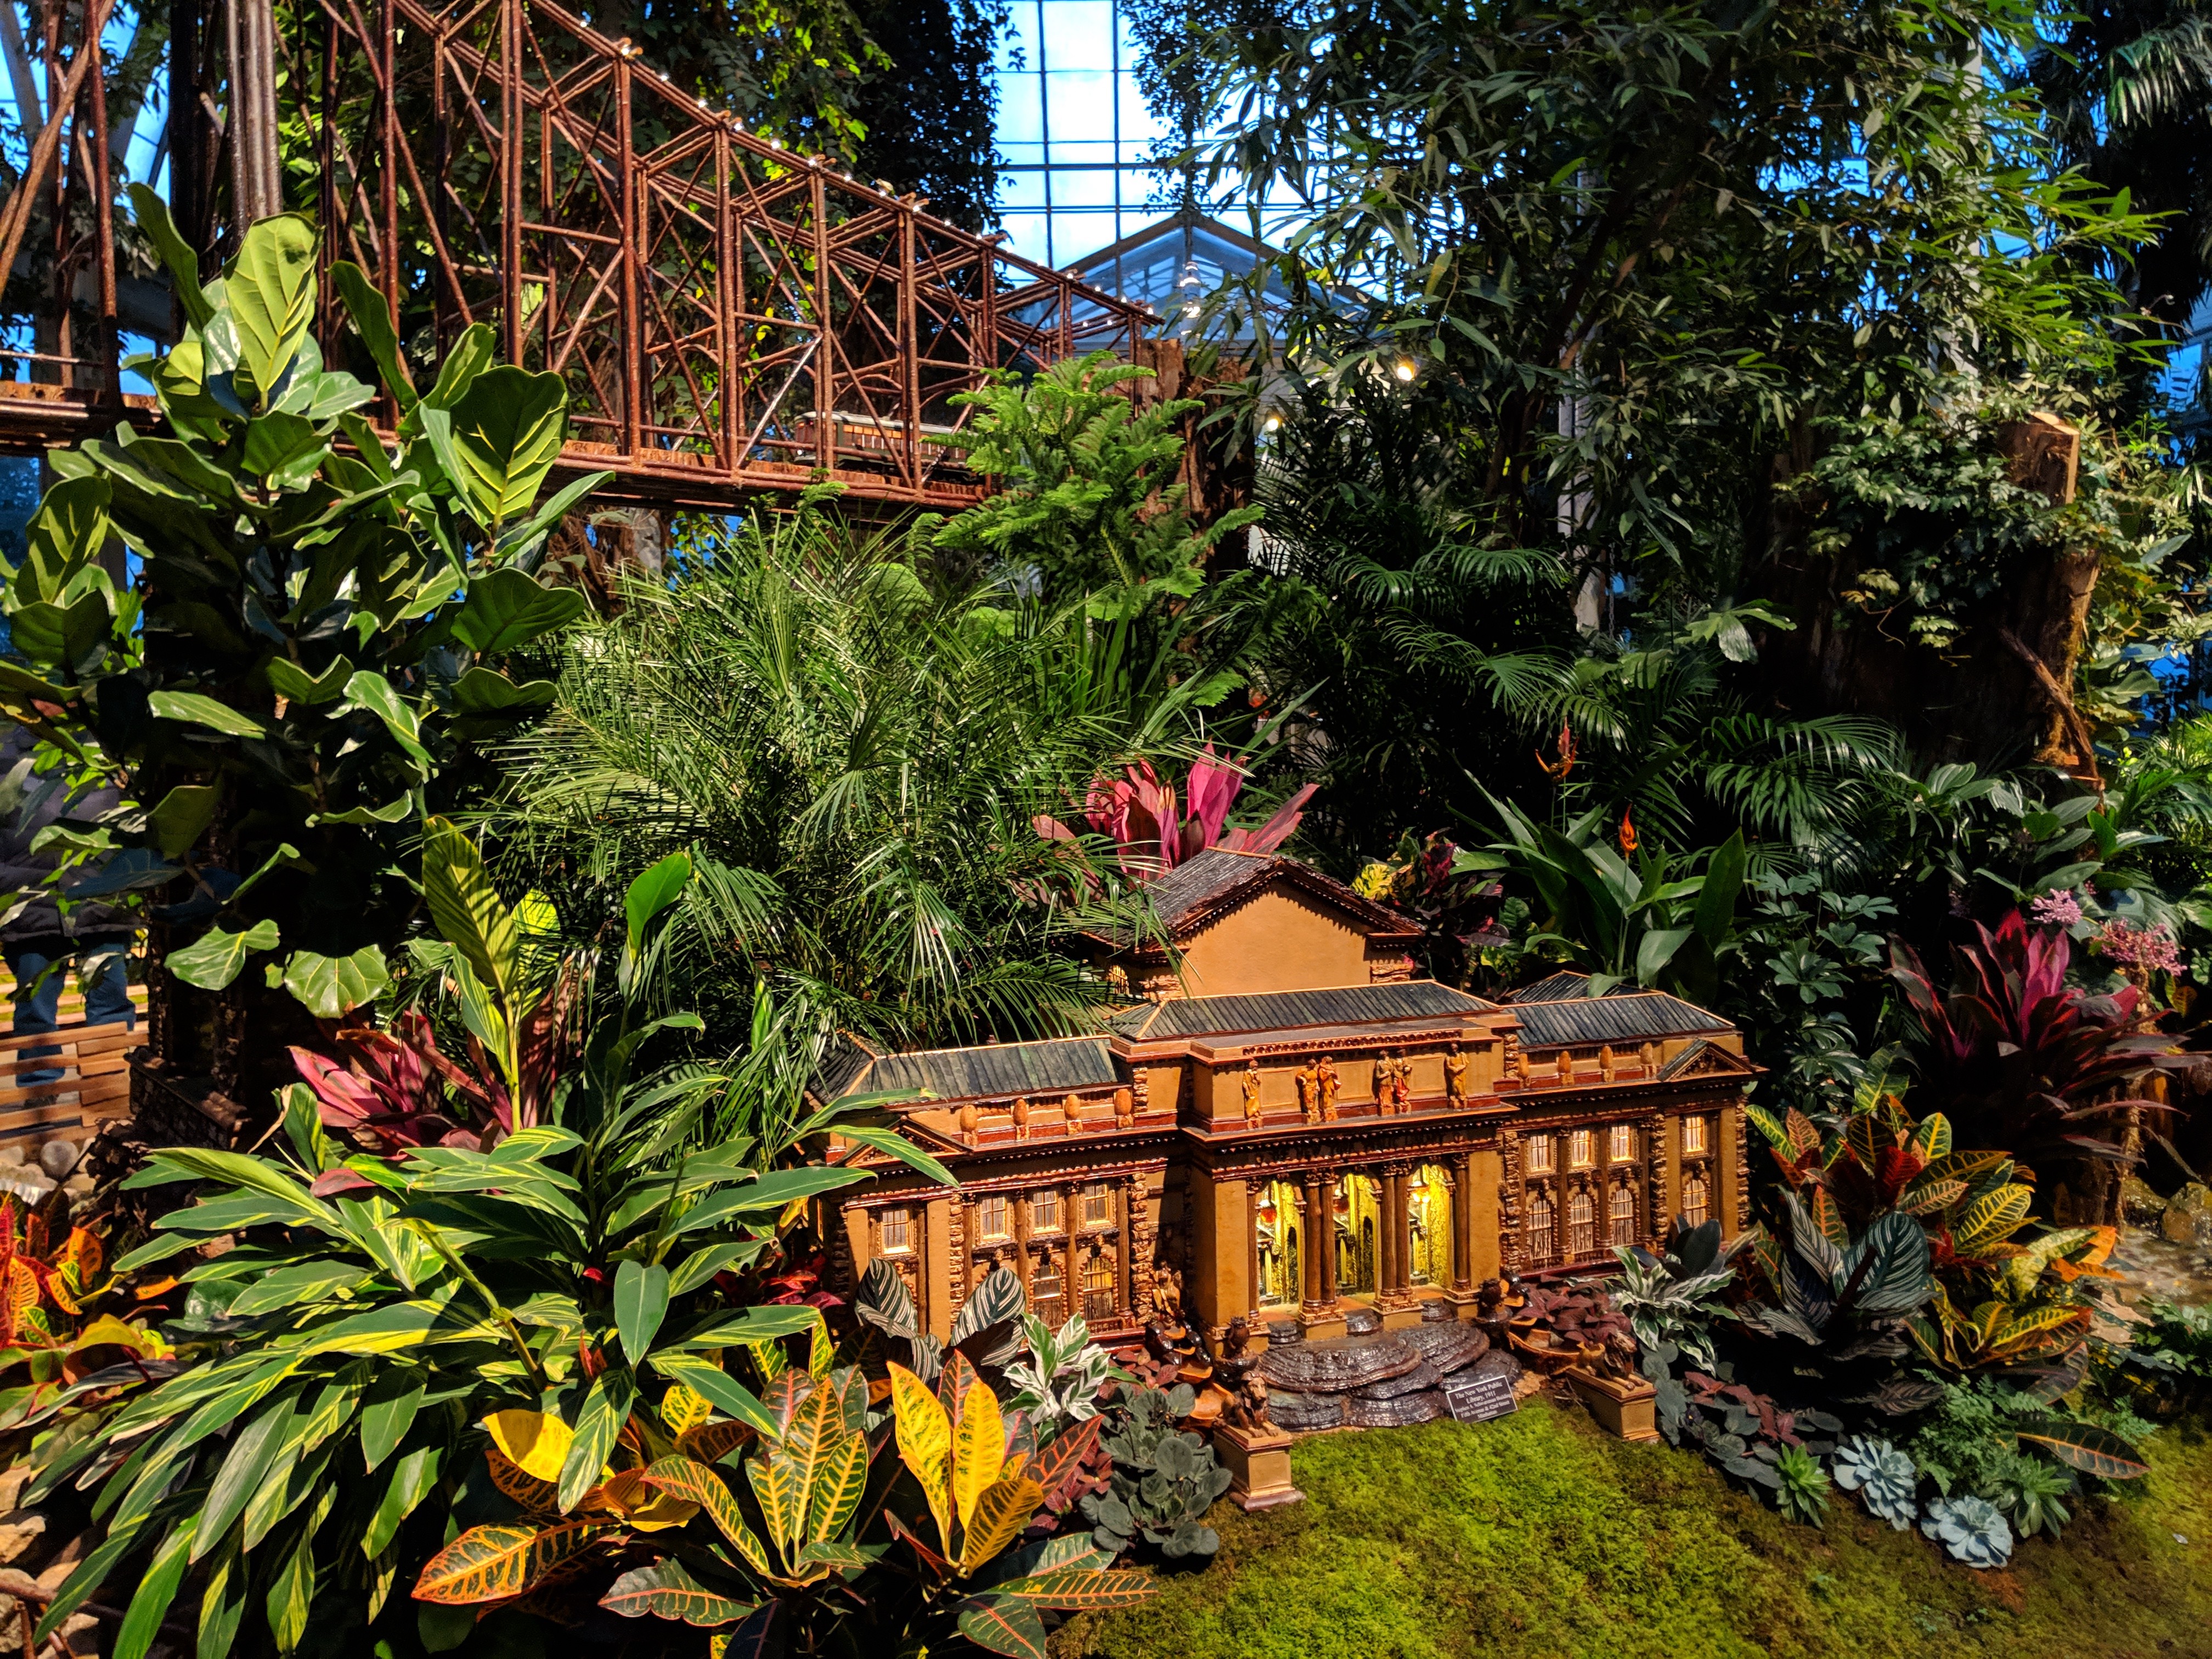 File Holiday Train Show At The New York Botanical Gardens Jpg